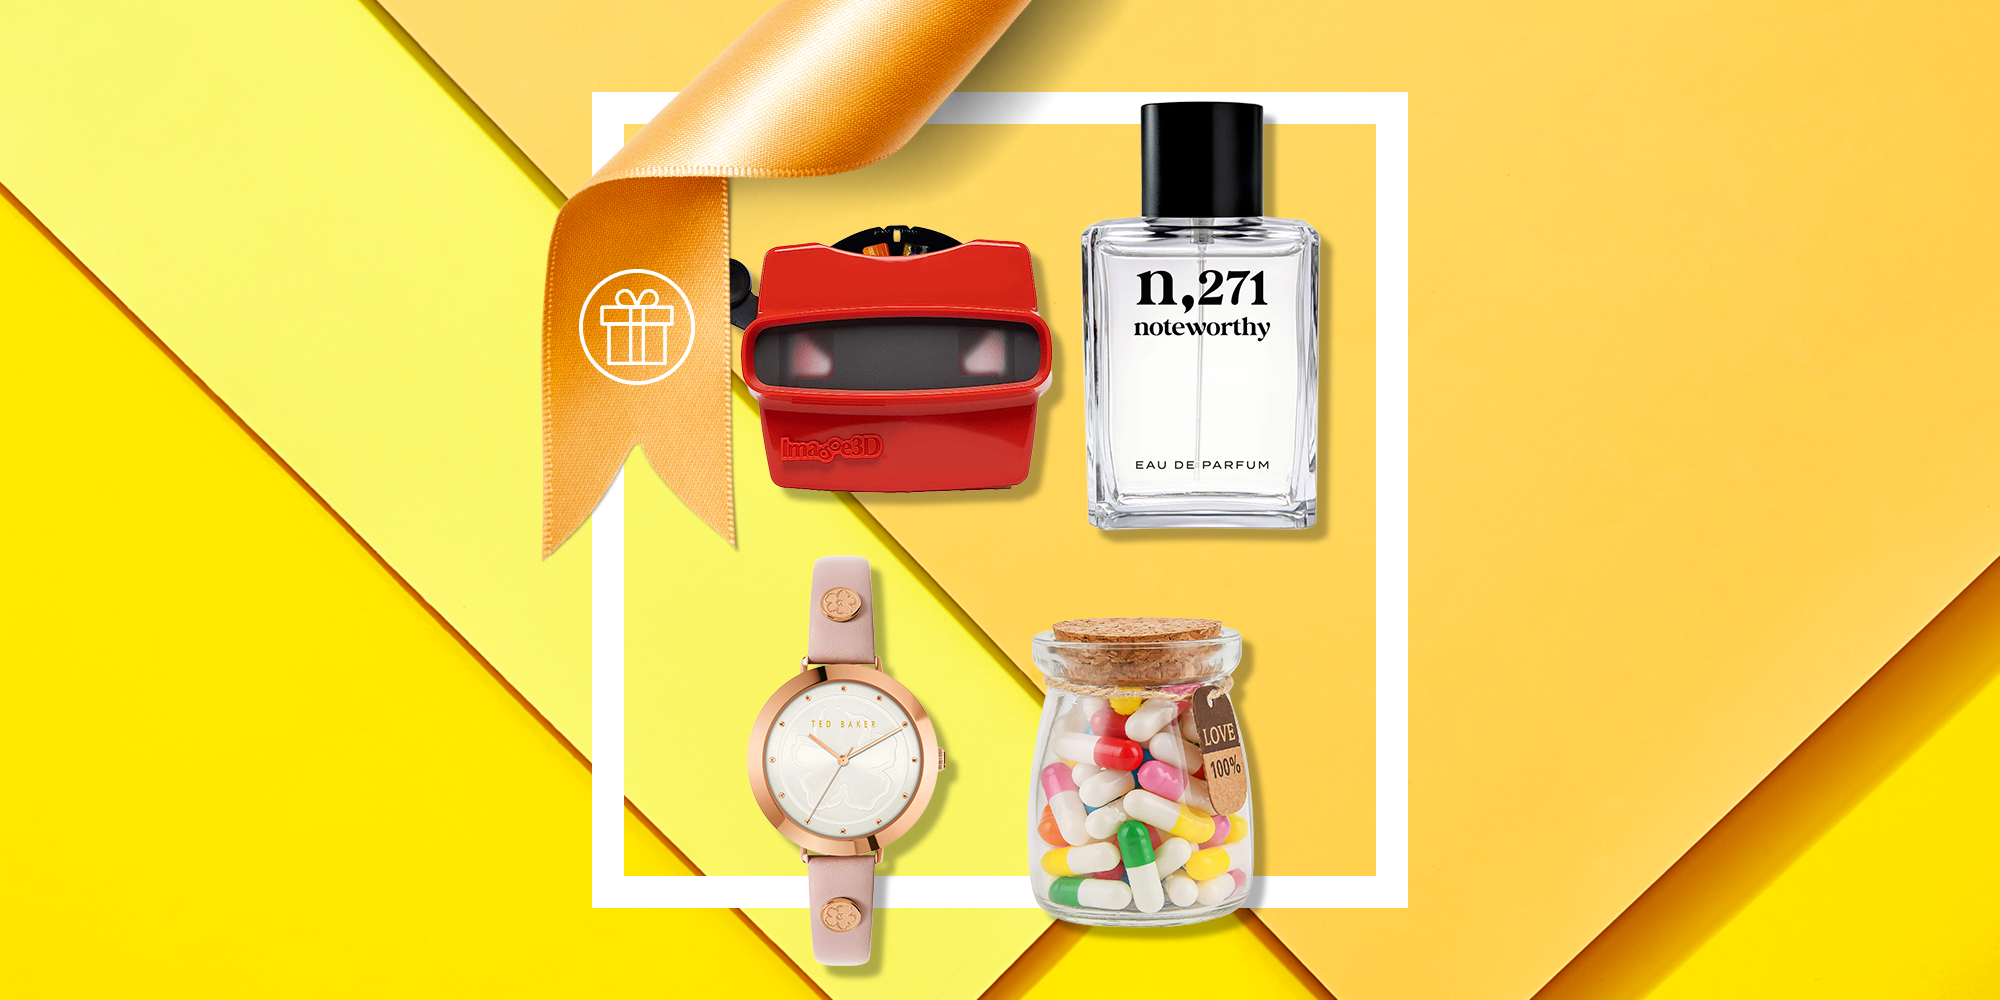 The Under $50 Gift Guide - A Thoughtful Place